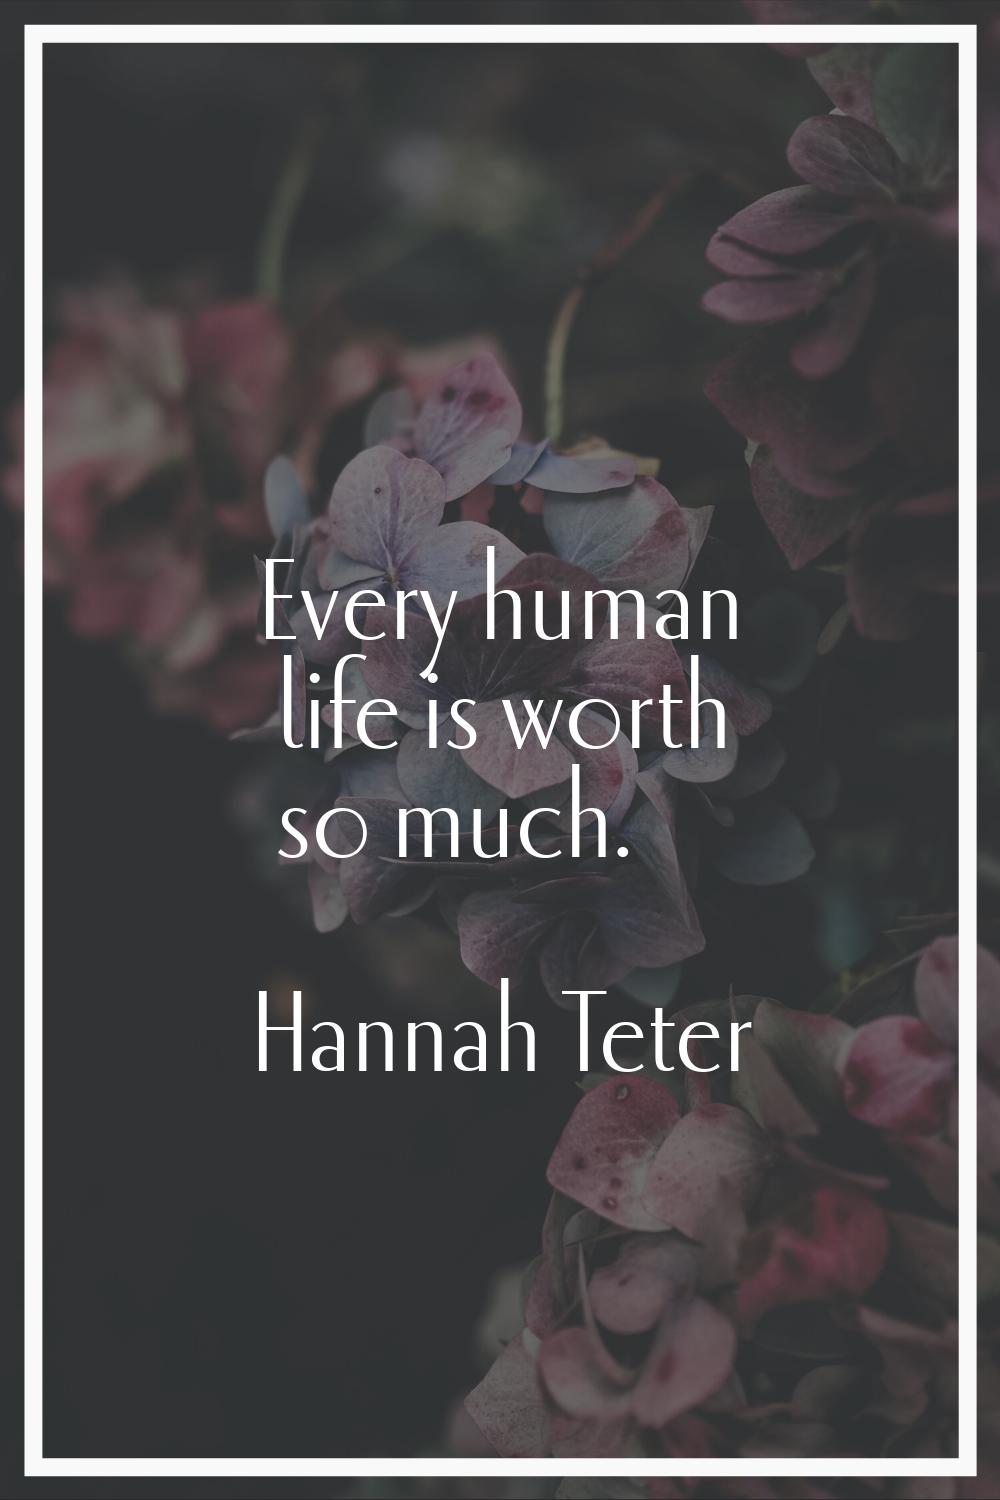 Every human life is worth so much.